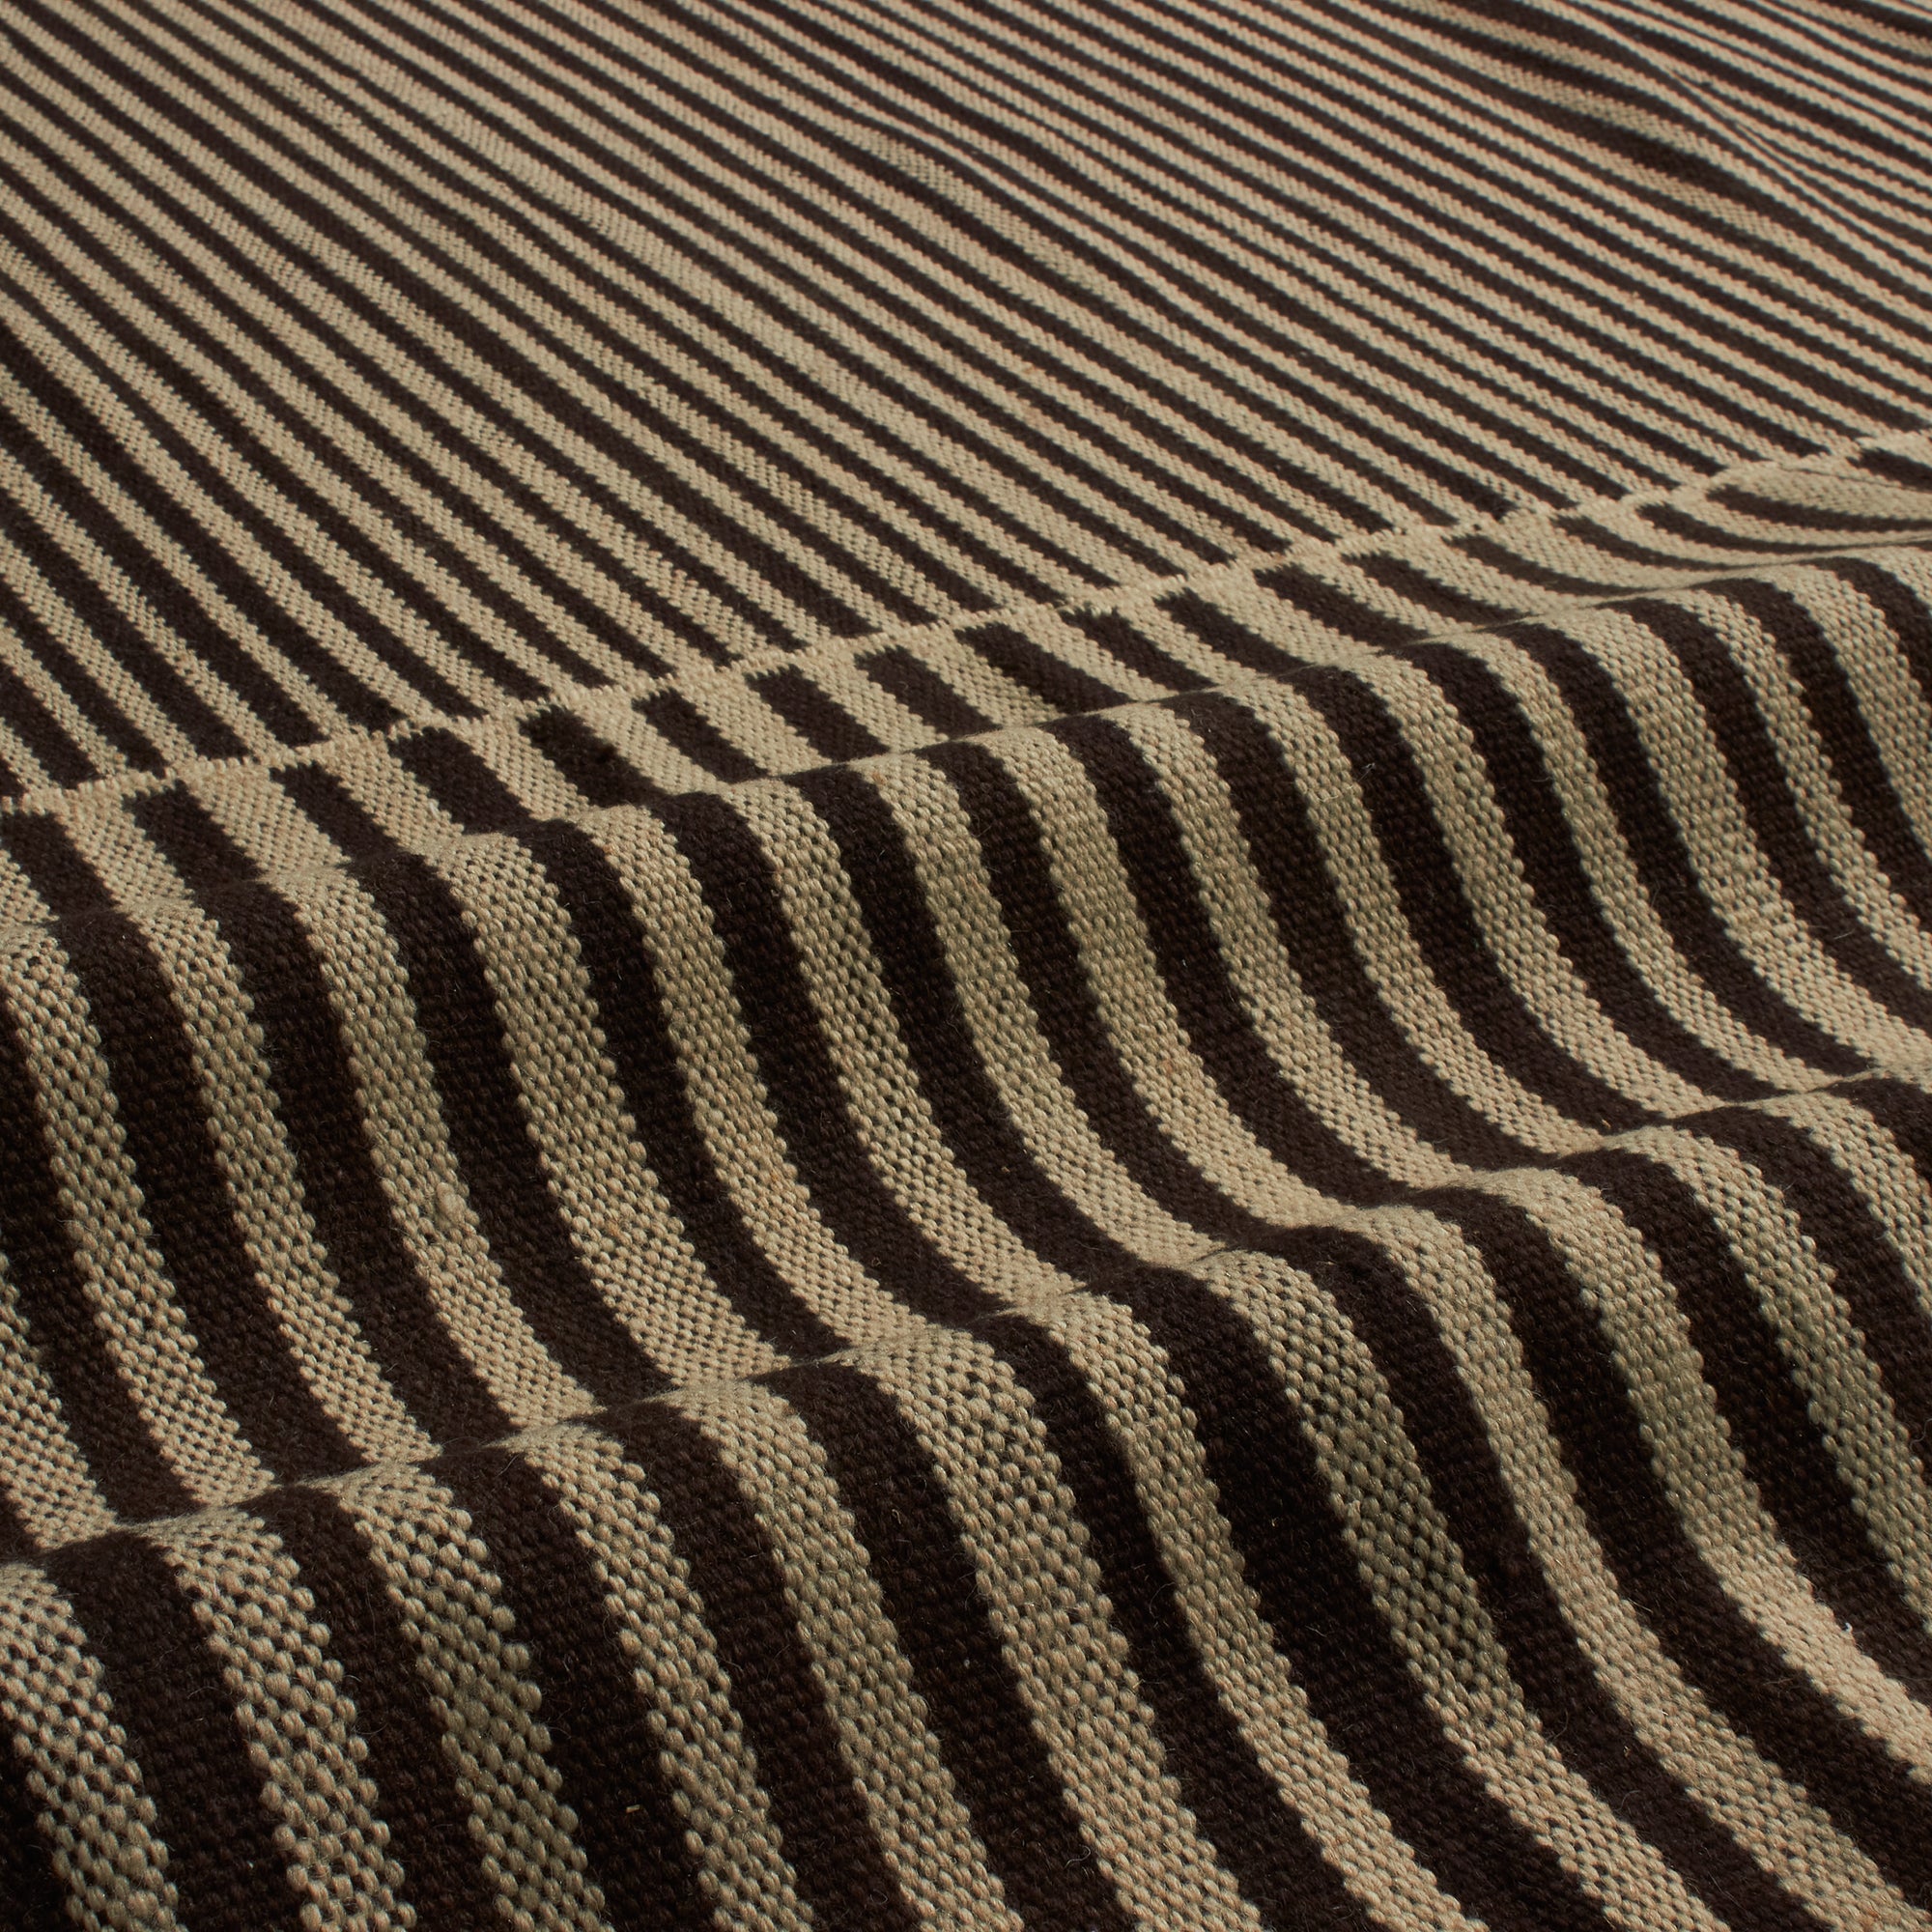 An homage to the quintessential Moroccan rug, ancient patterns are reimagined as bold, geometric forms.